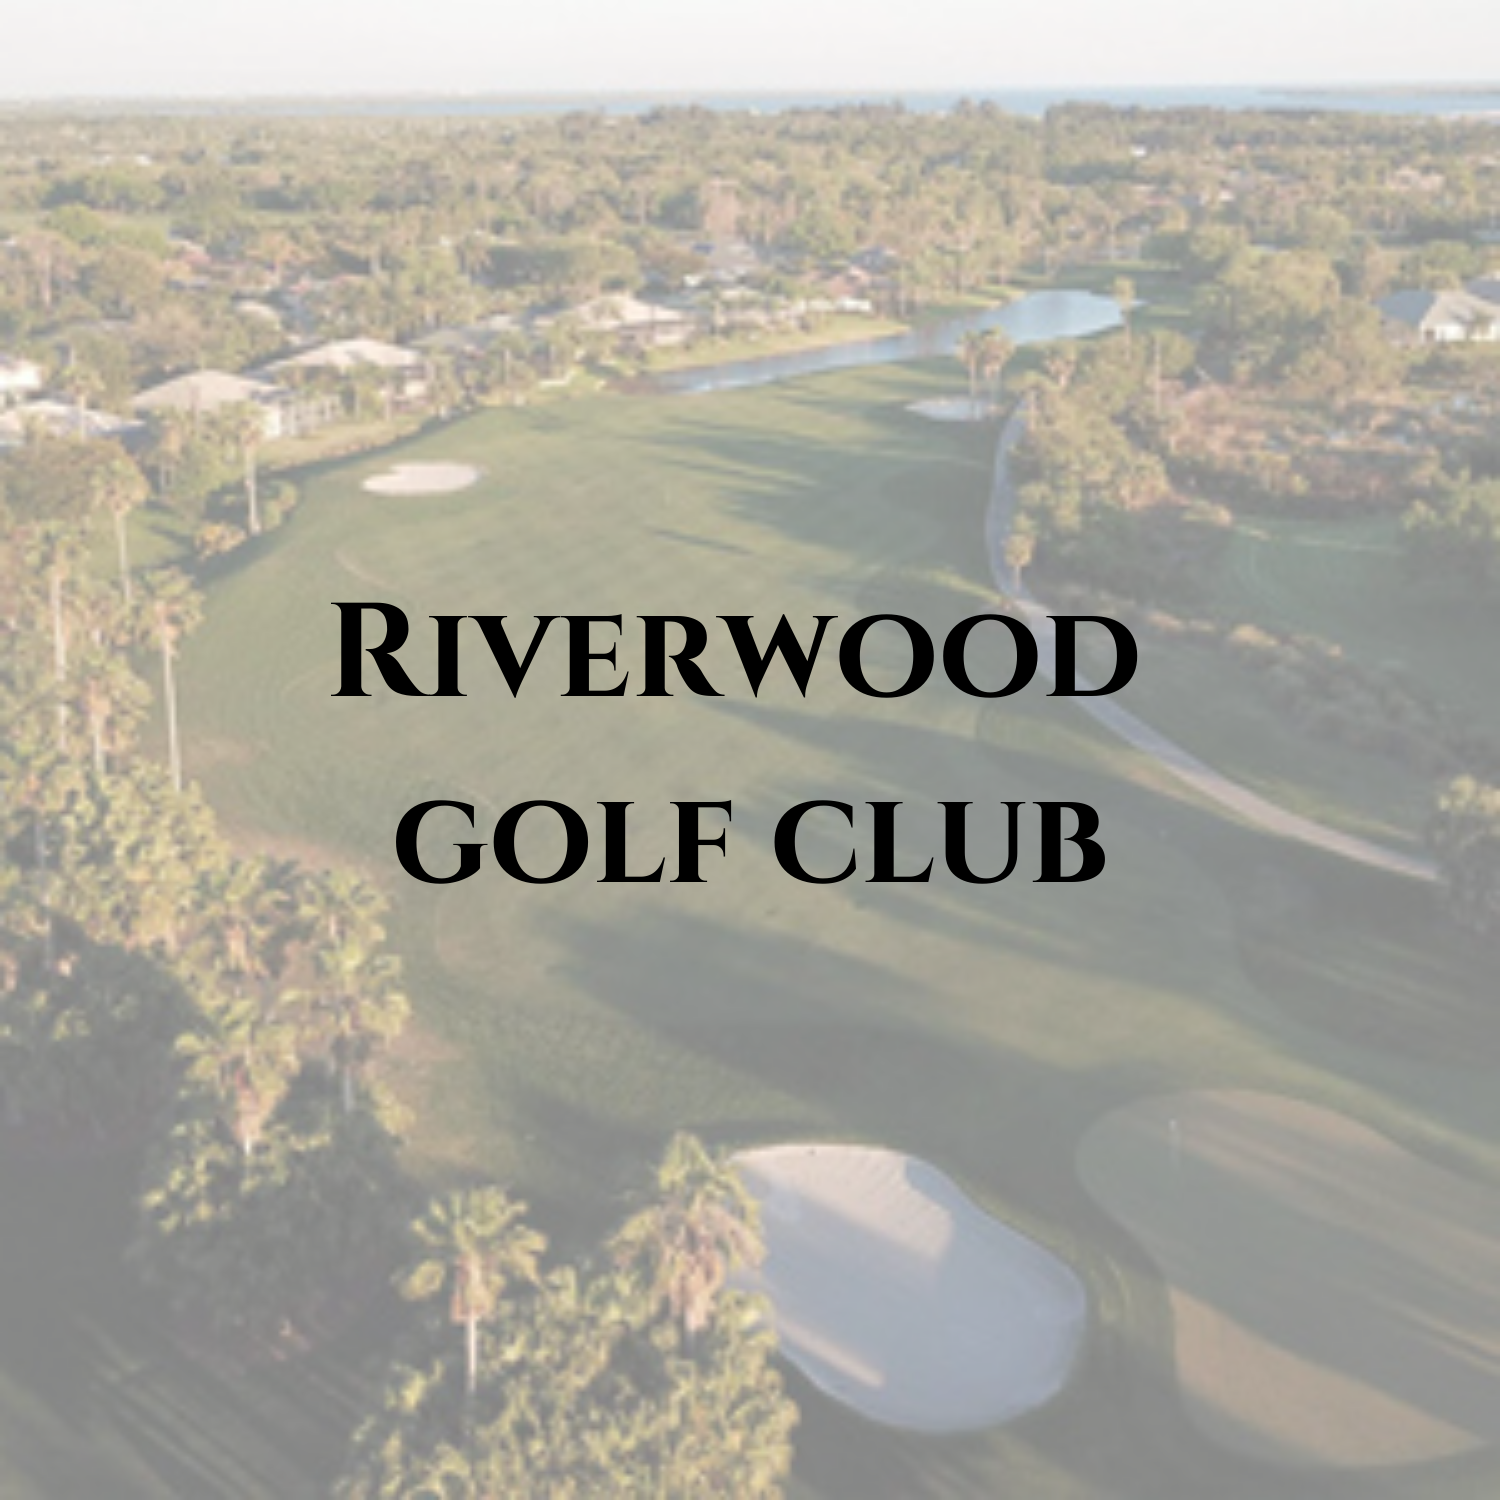 Riverwood Golf Club 1x1 for website button.png